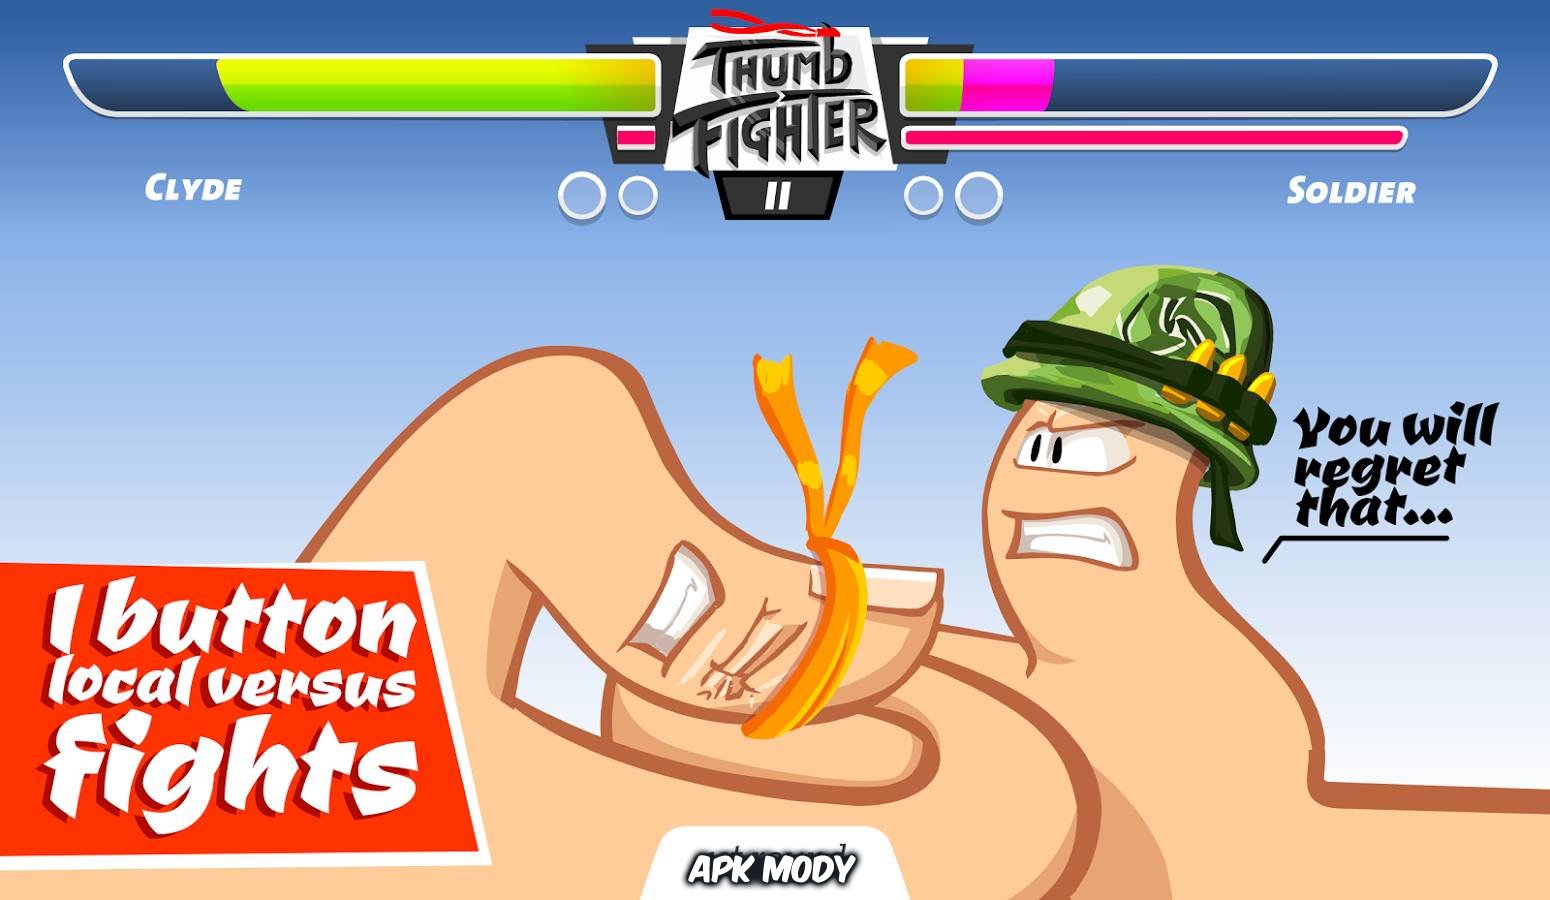 Download Game Thumb Fighter Cheat